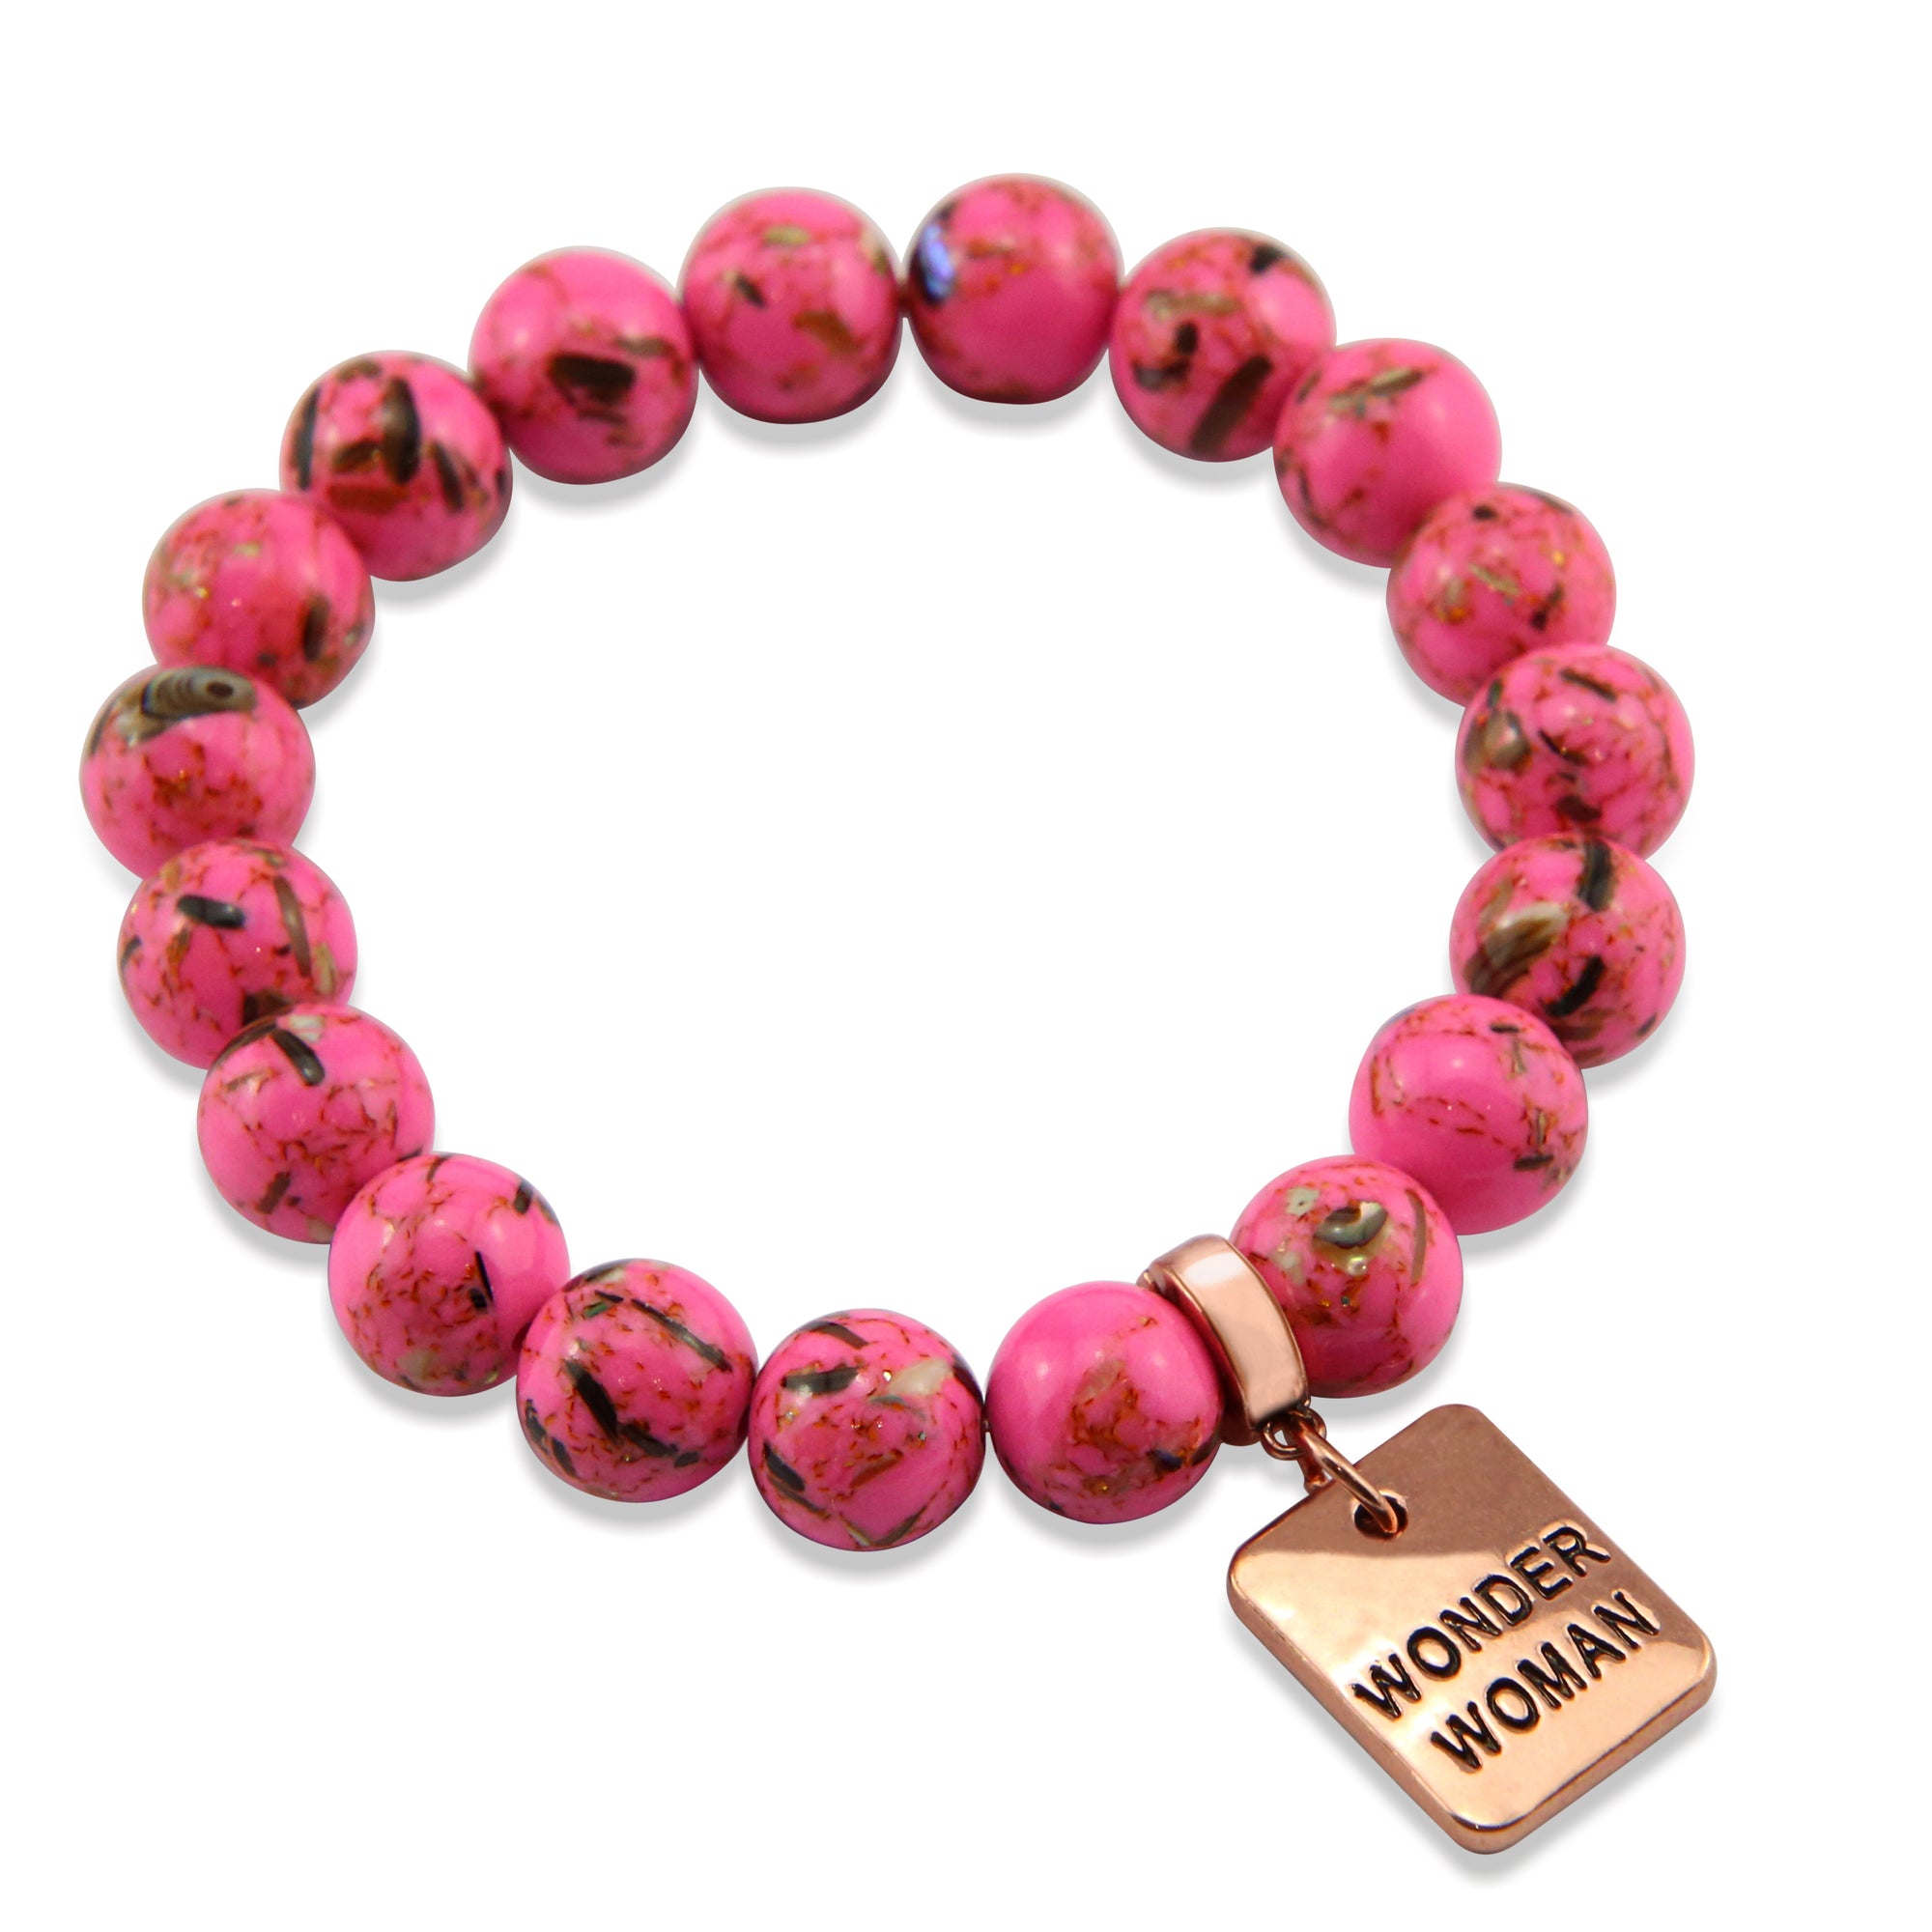 Hot Pink Synthesis Stone 10mm Bead Bracelet with Wonder Woman Rose Gold Word Charm. Fundraiser for the National Breast Cancer Foundation